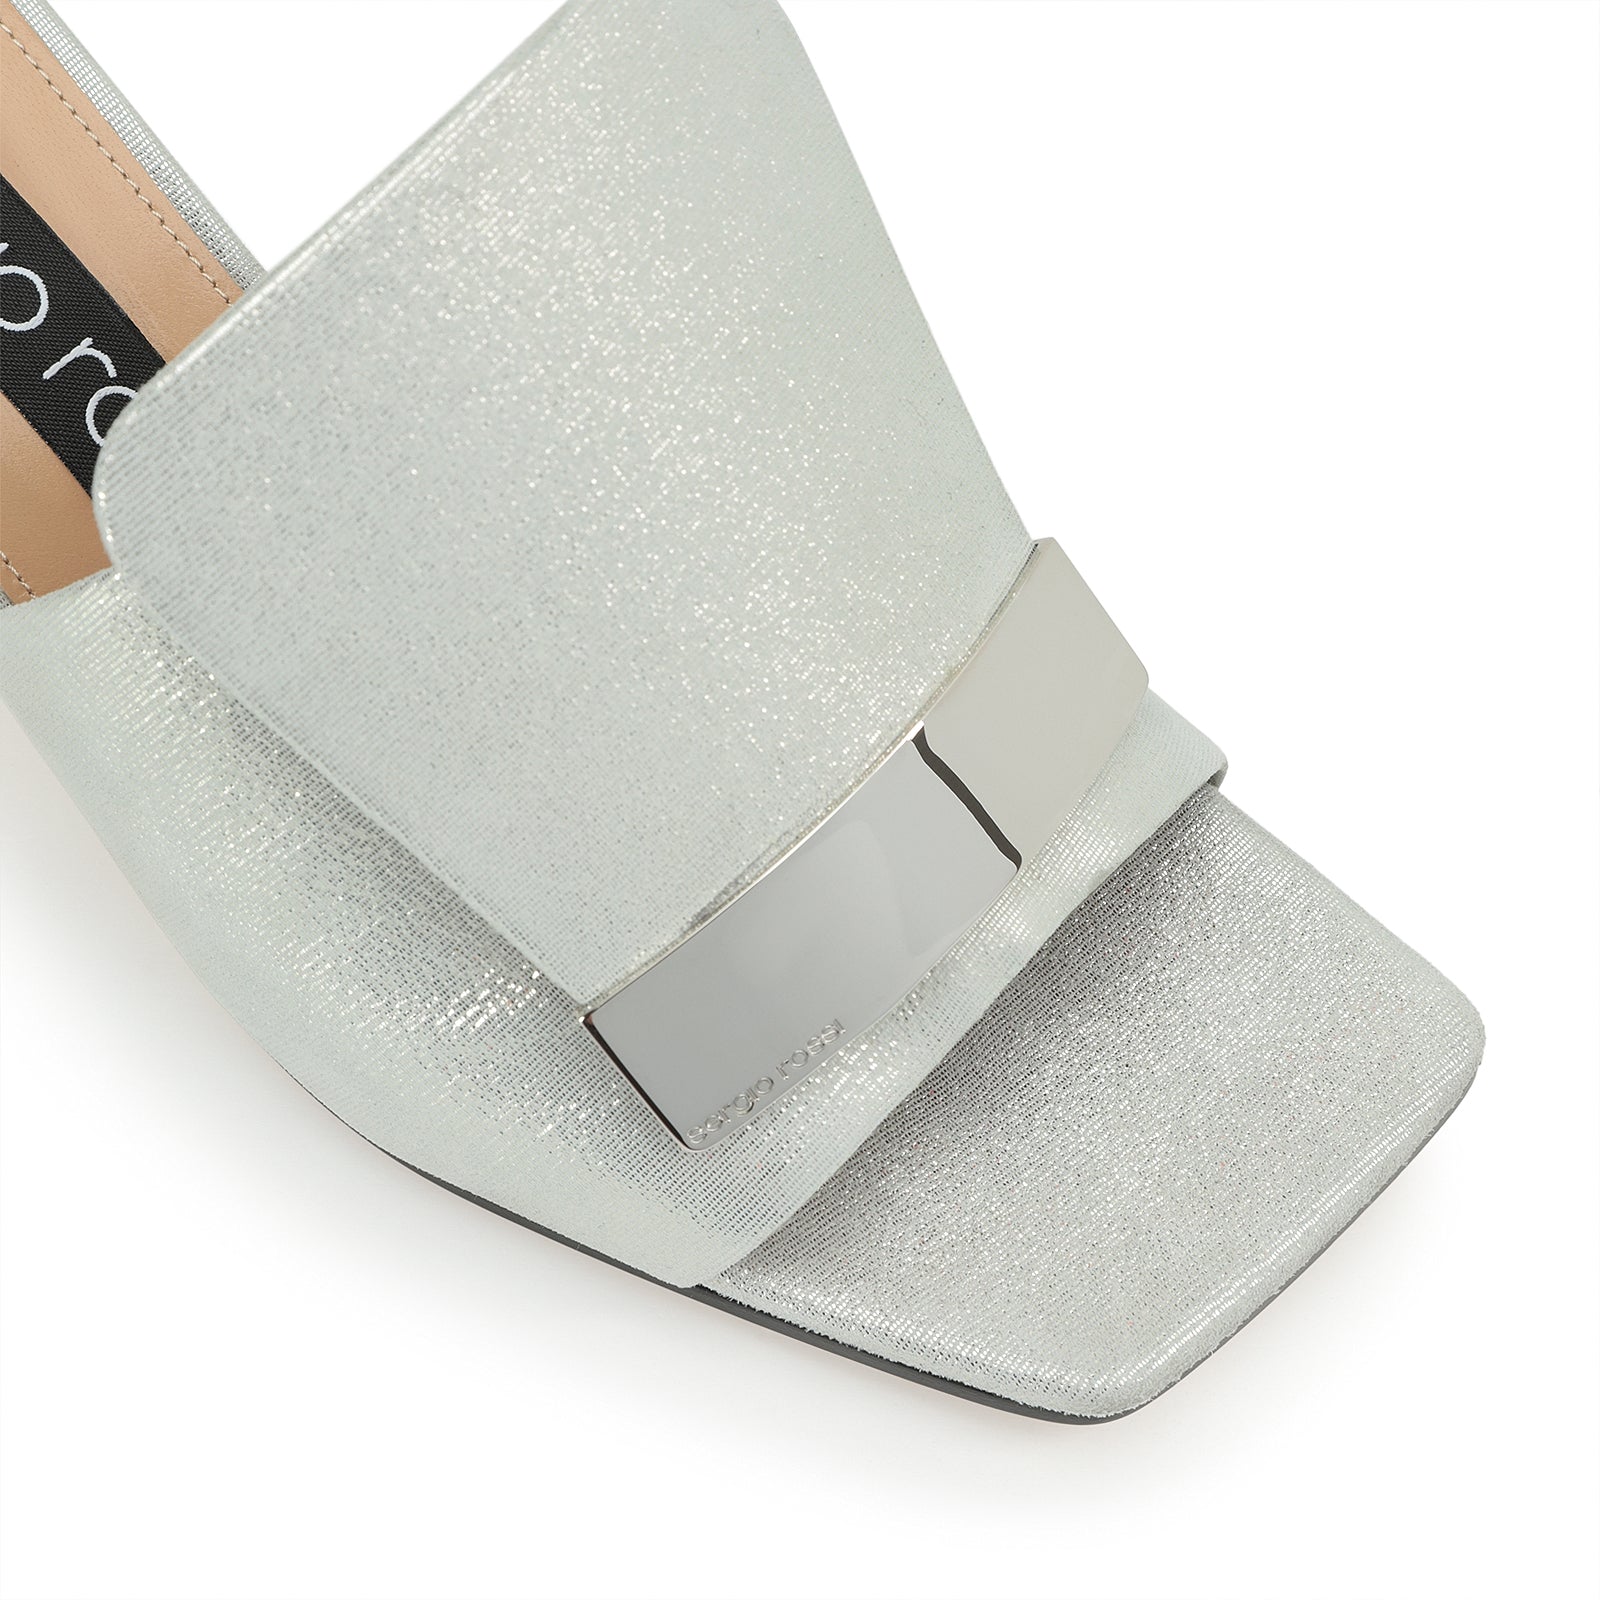 Sr1 60 heeled mules - Silver